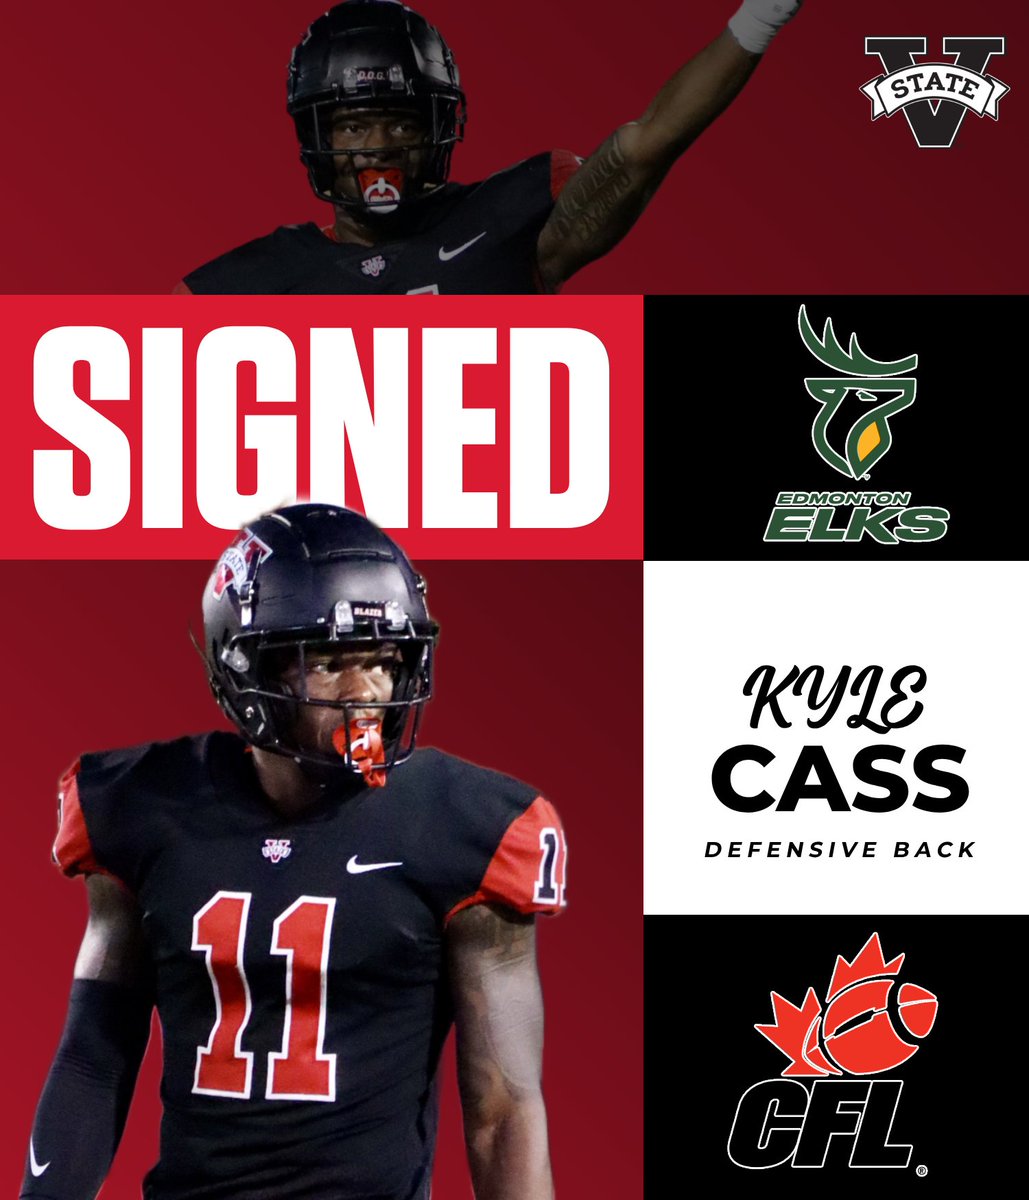 DB Kyle Cass has signed a contract with the CFL's Edmonton Elks ‼️ Congratulations Kyle, go bring some D.O.G. to the CFL #WTS